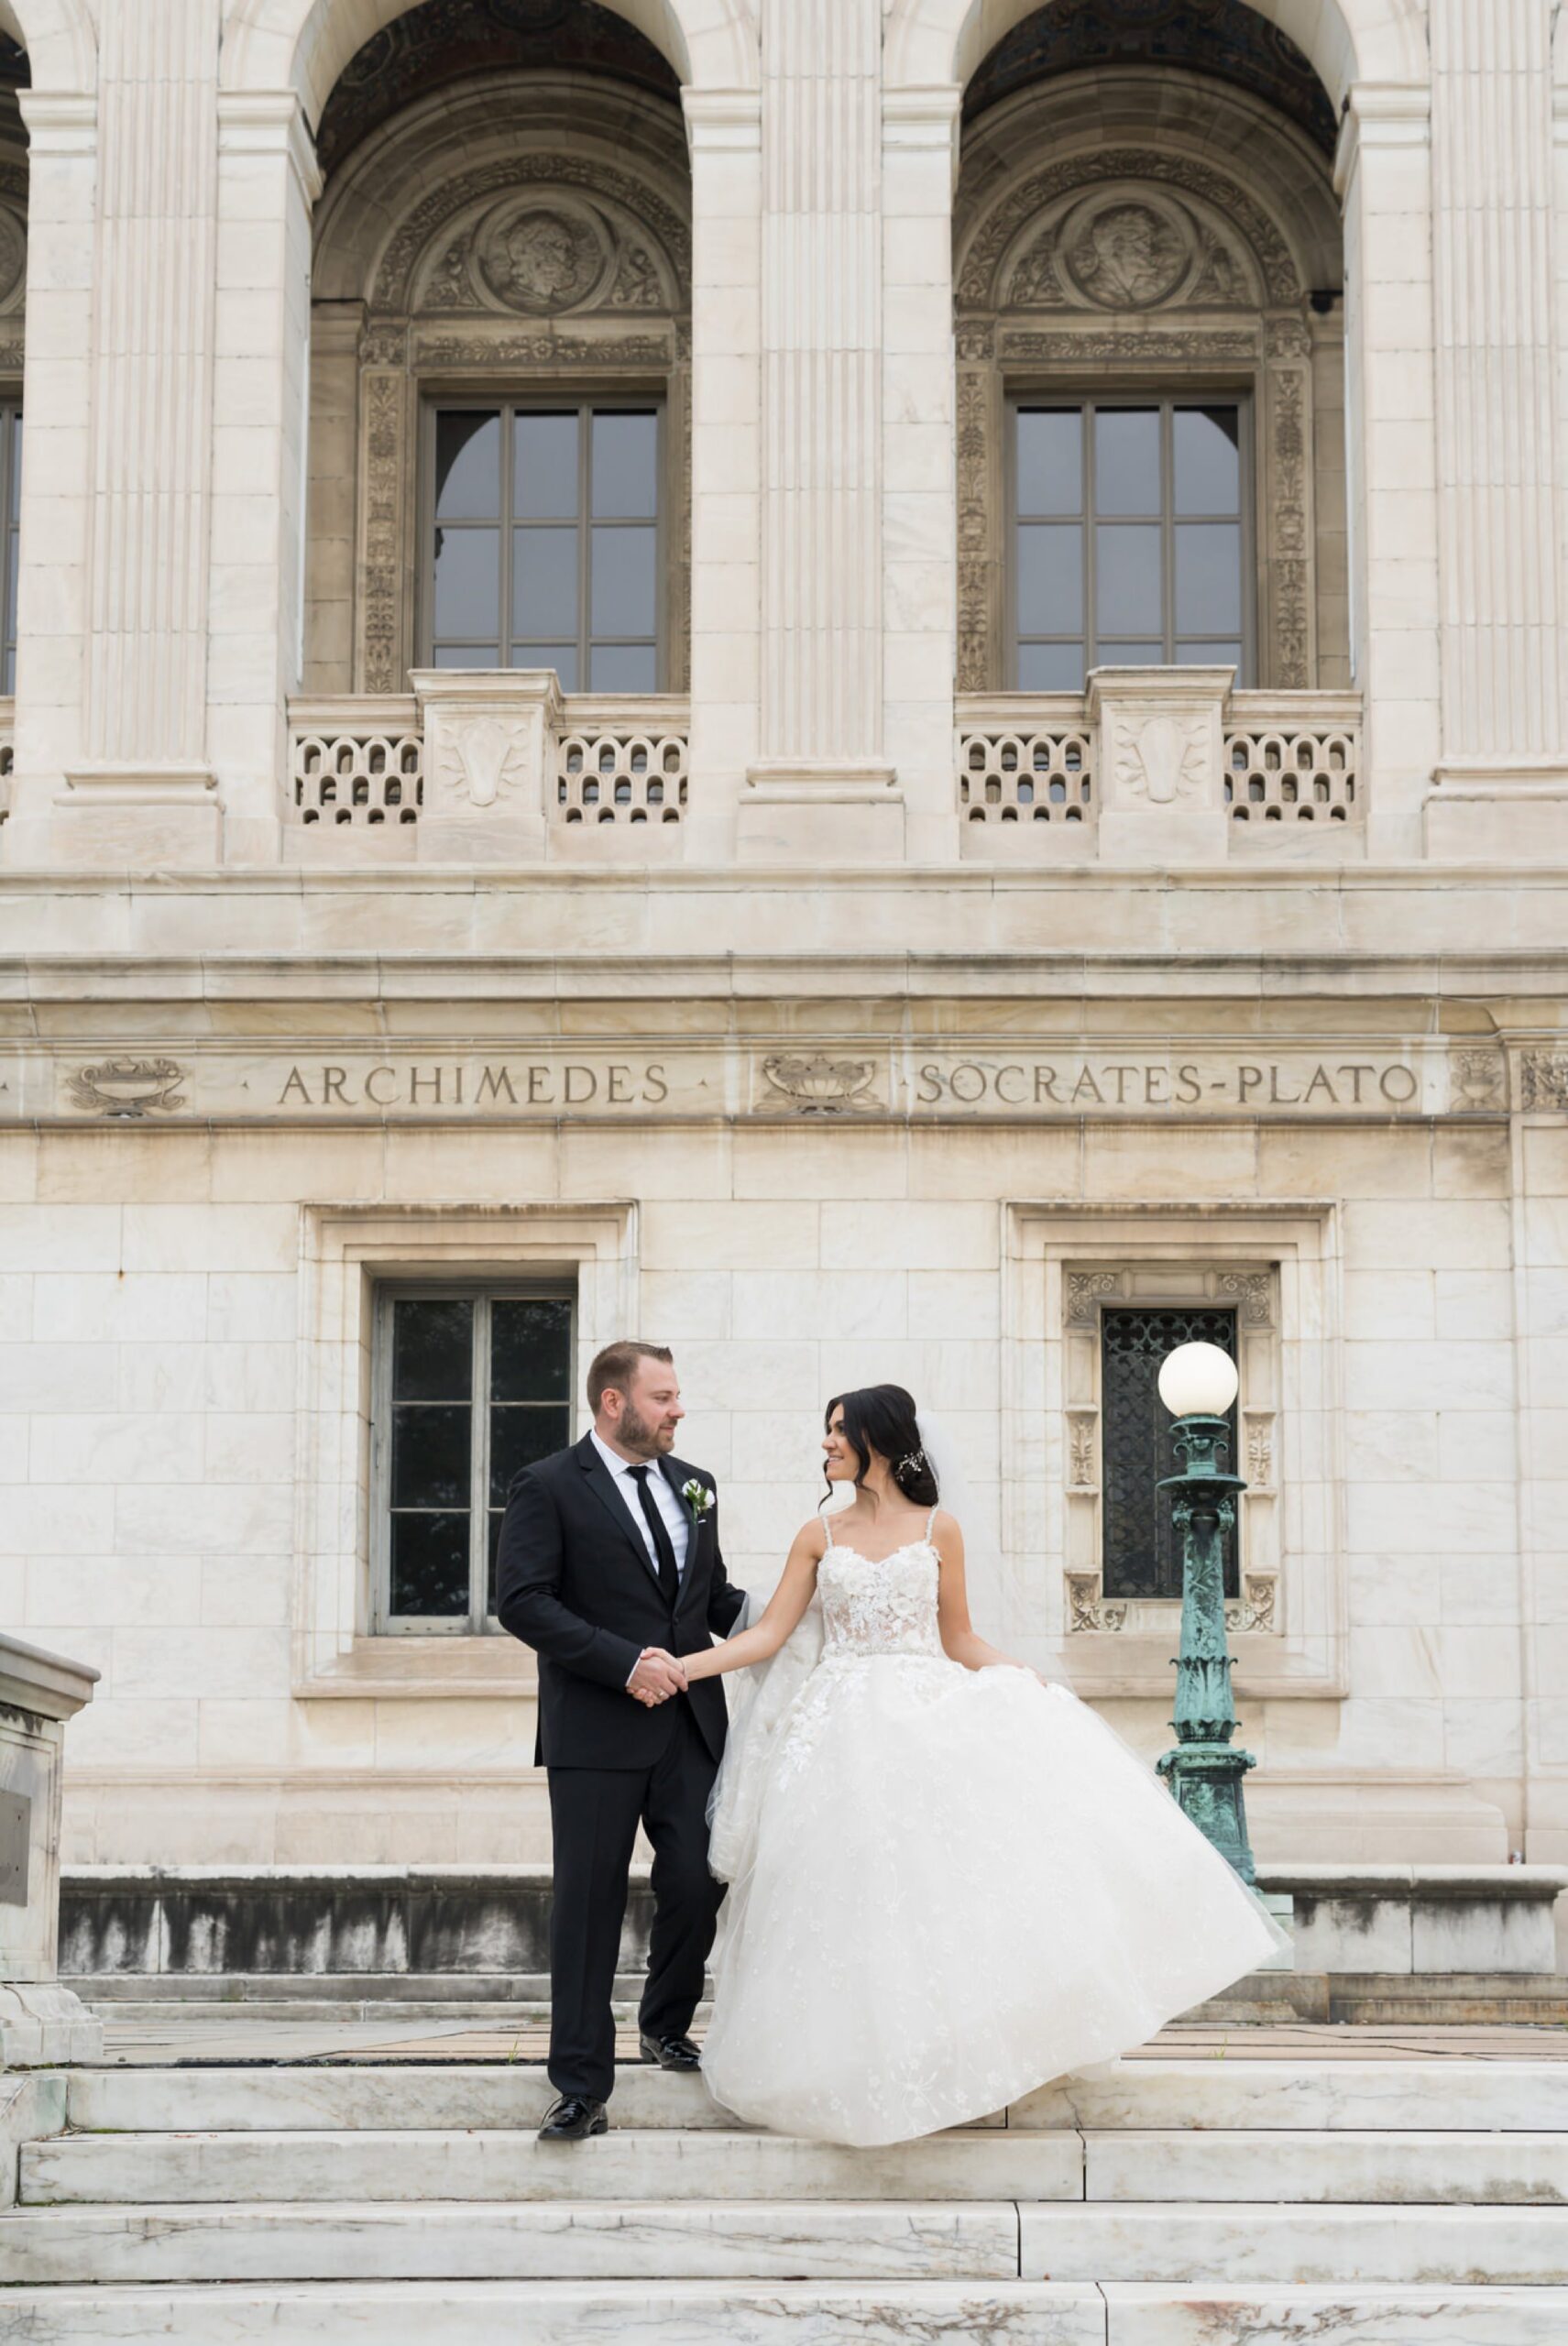 A bride and groom walk down the steps of the Detroit Public Library on Woodward.  